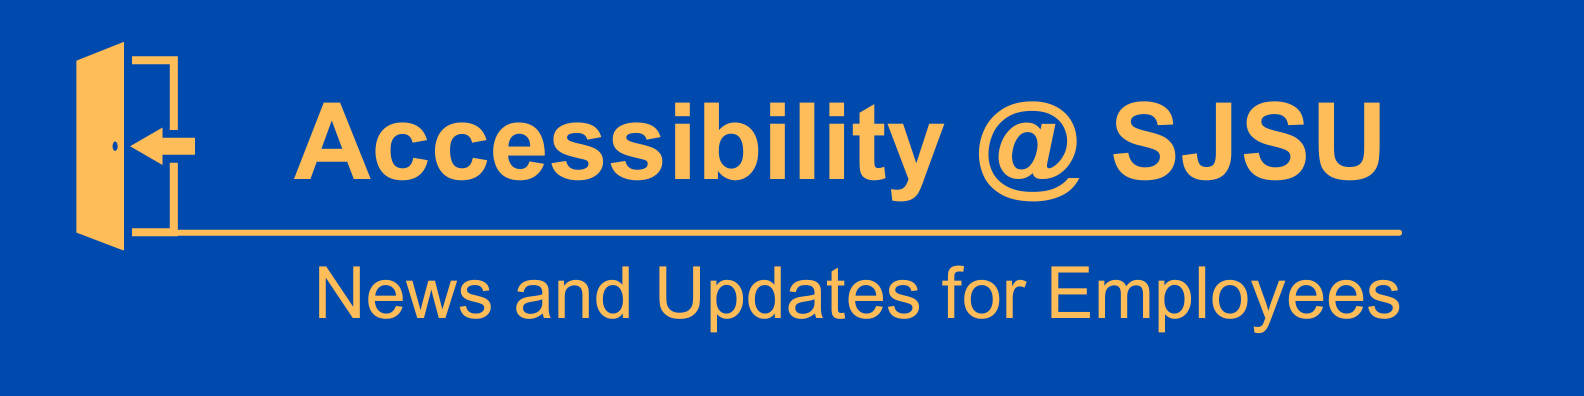 Accessibility @ SJSU Banner.png